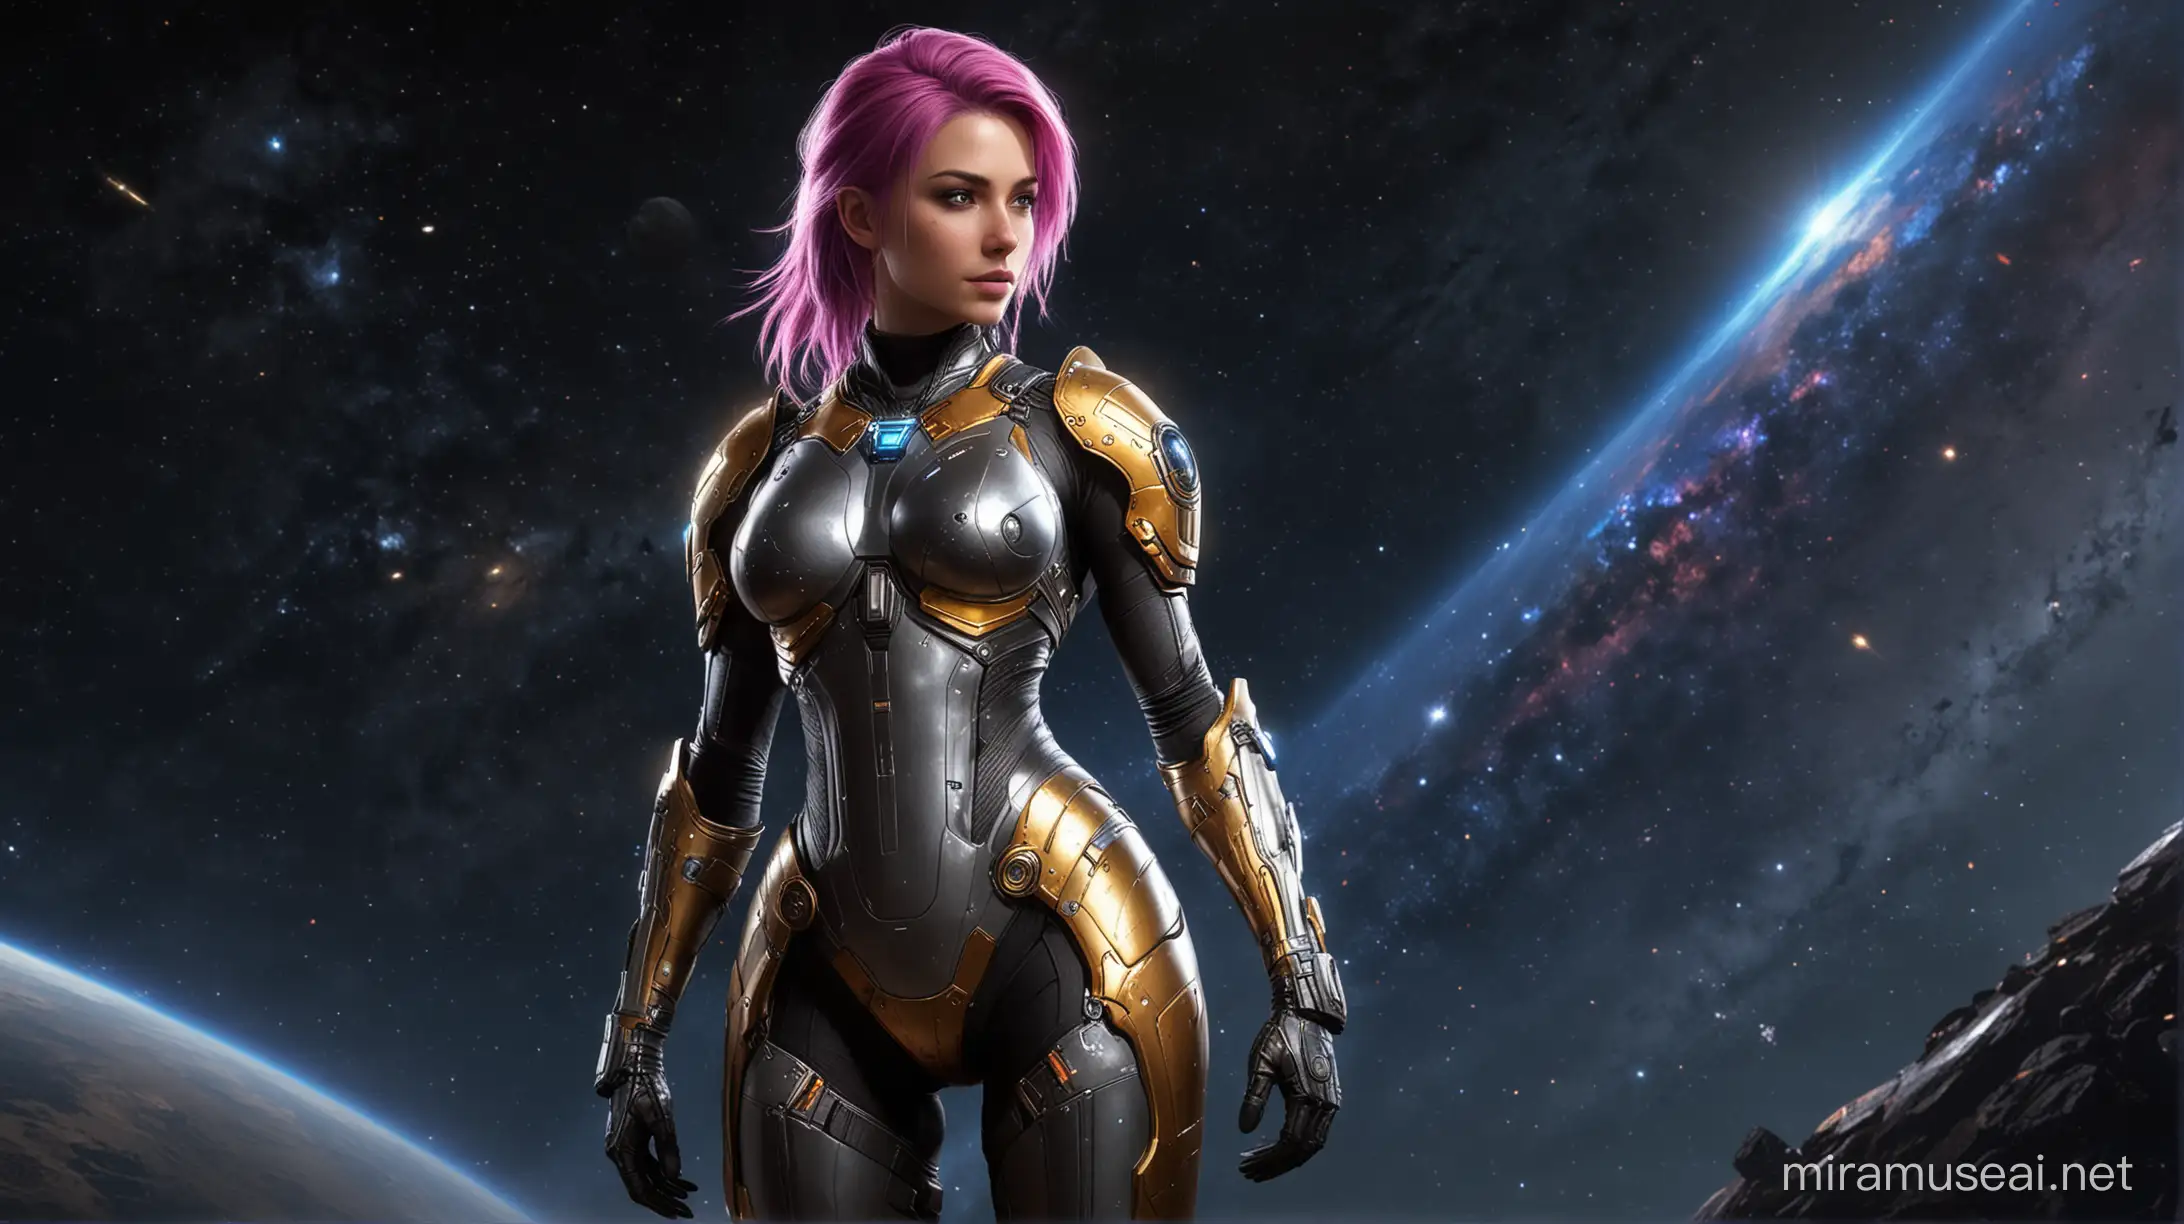 Brave Knight with Rainbow Hair in Cosmic Combat Gear